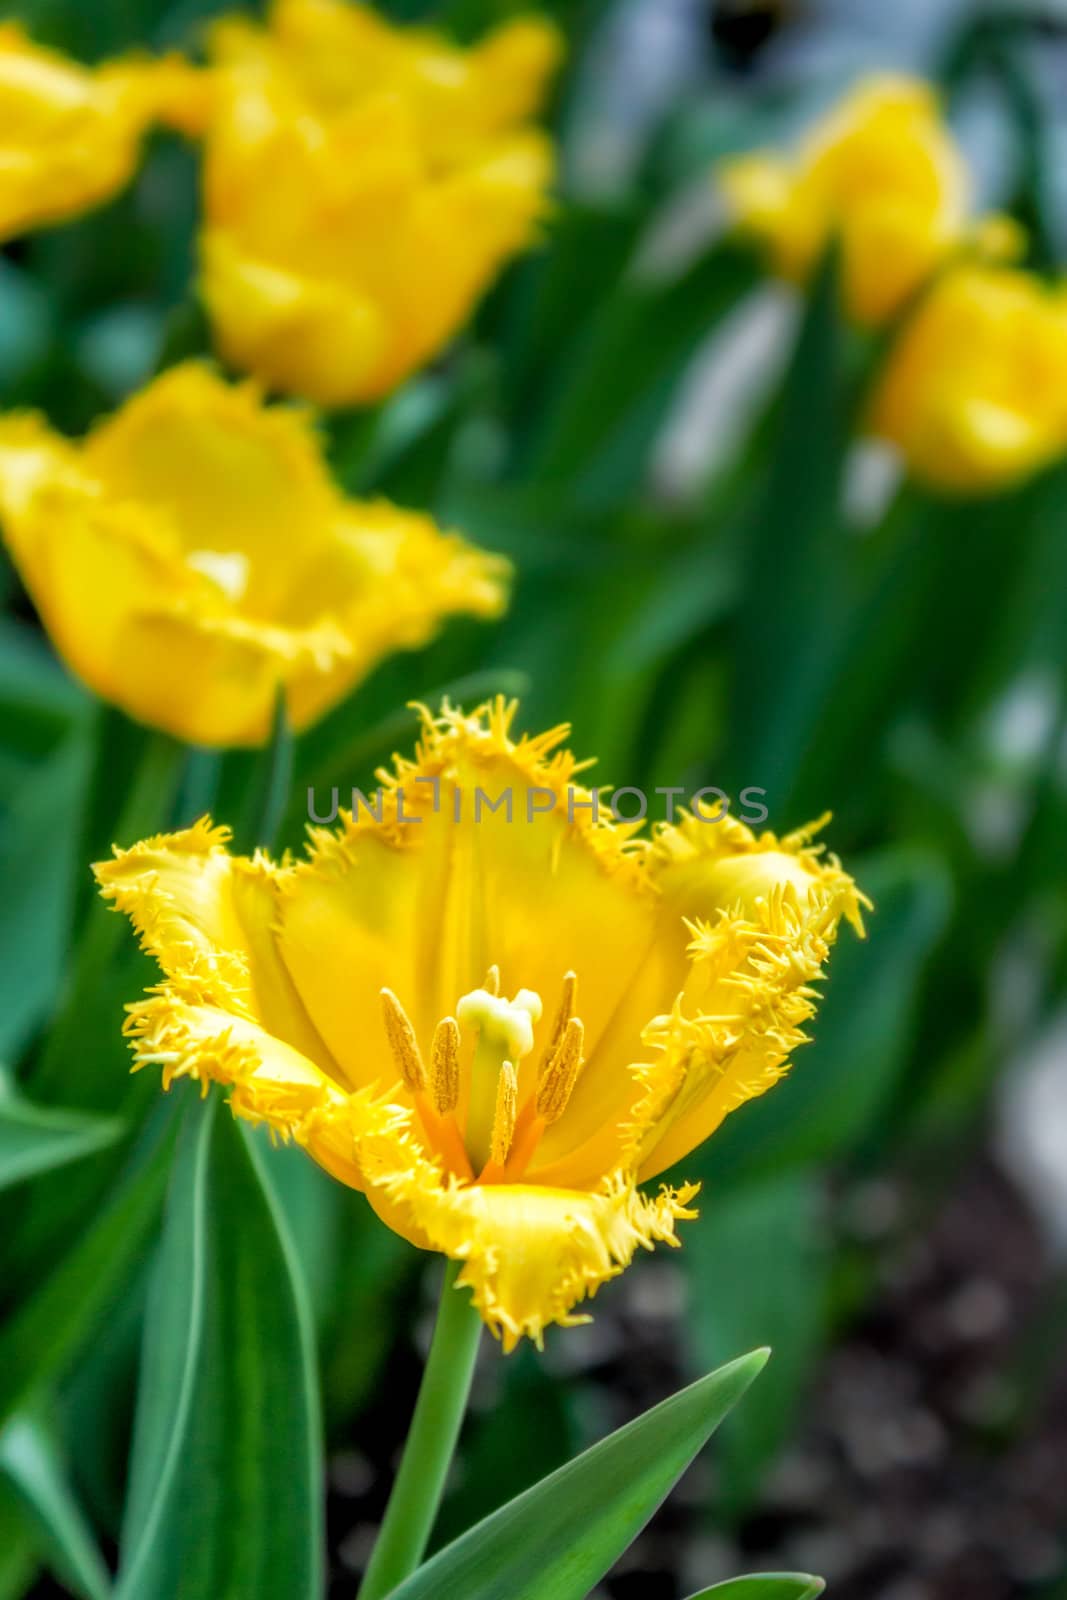 Yellow Frilly Tulips by wolterk